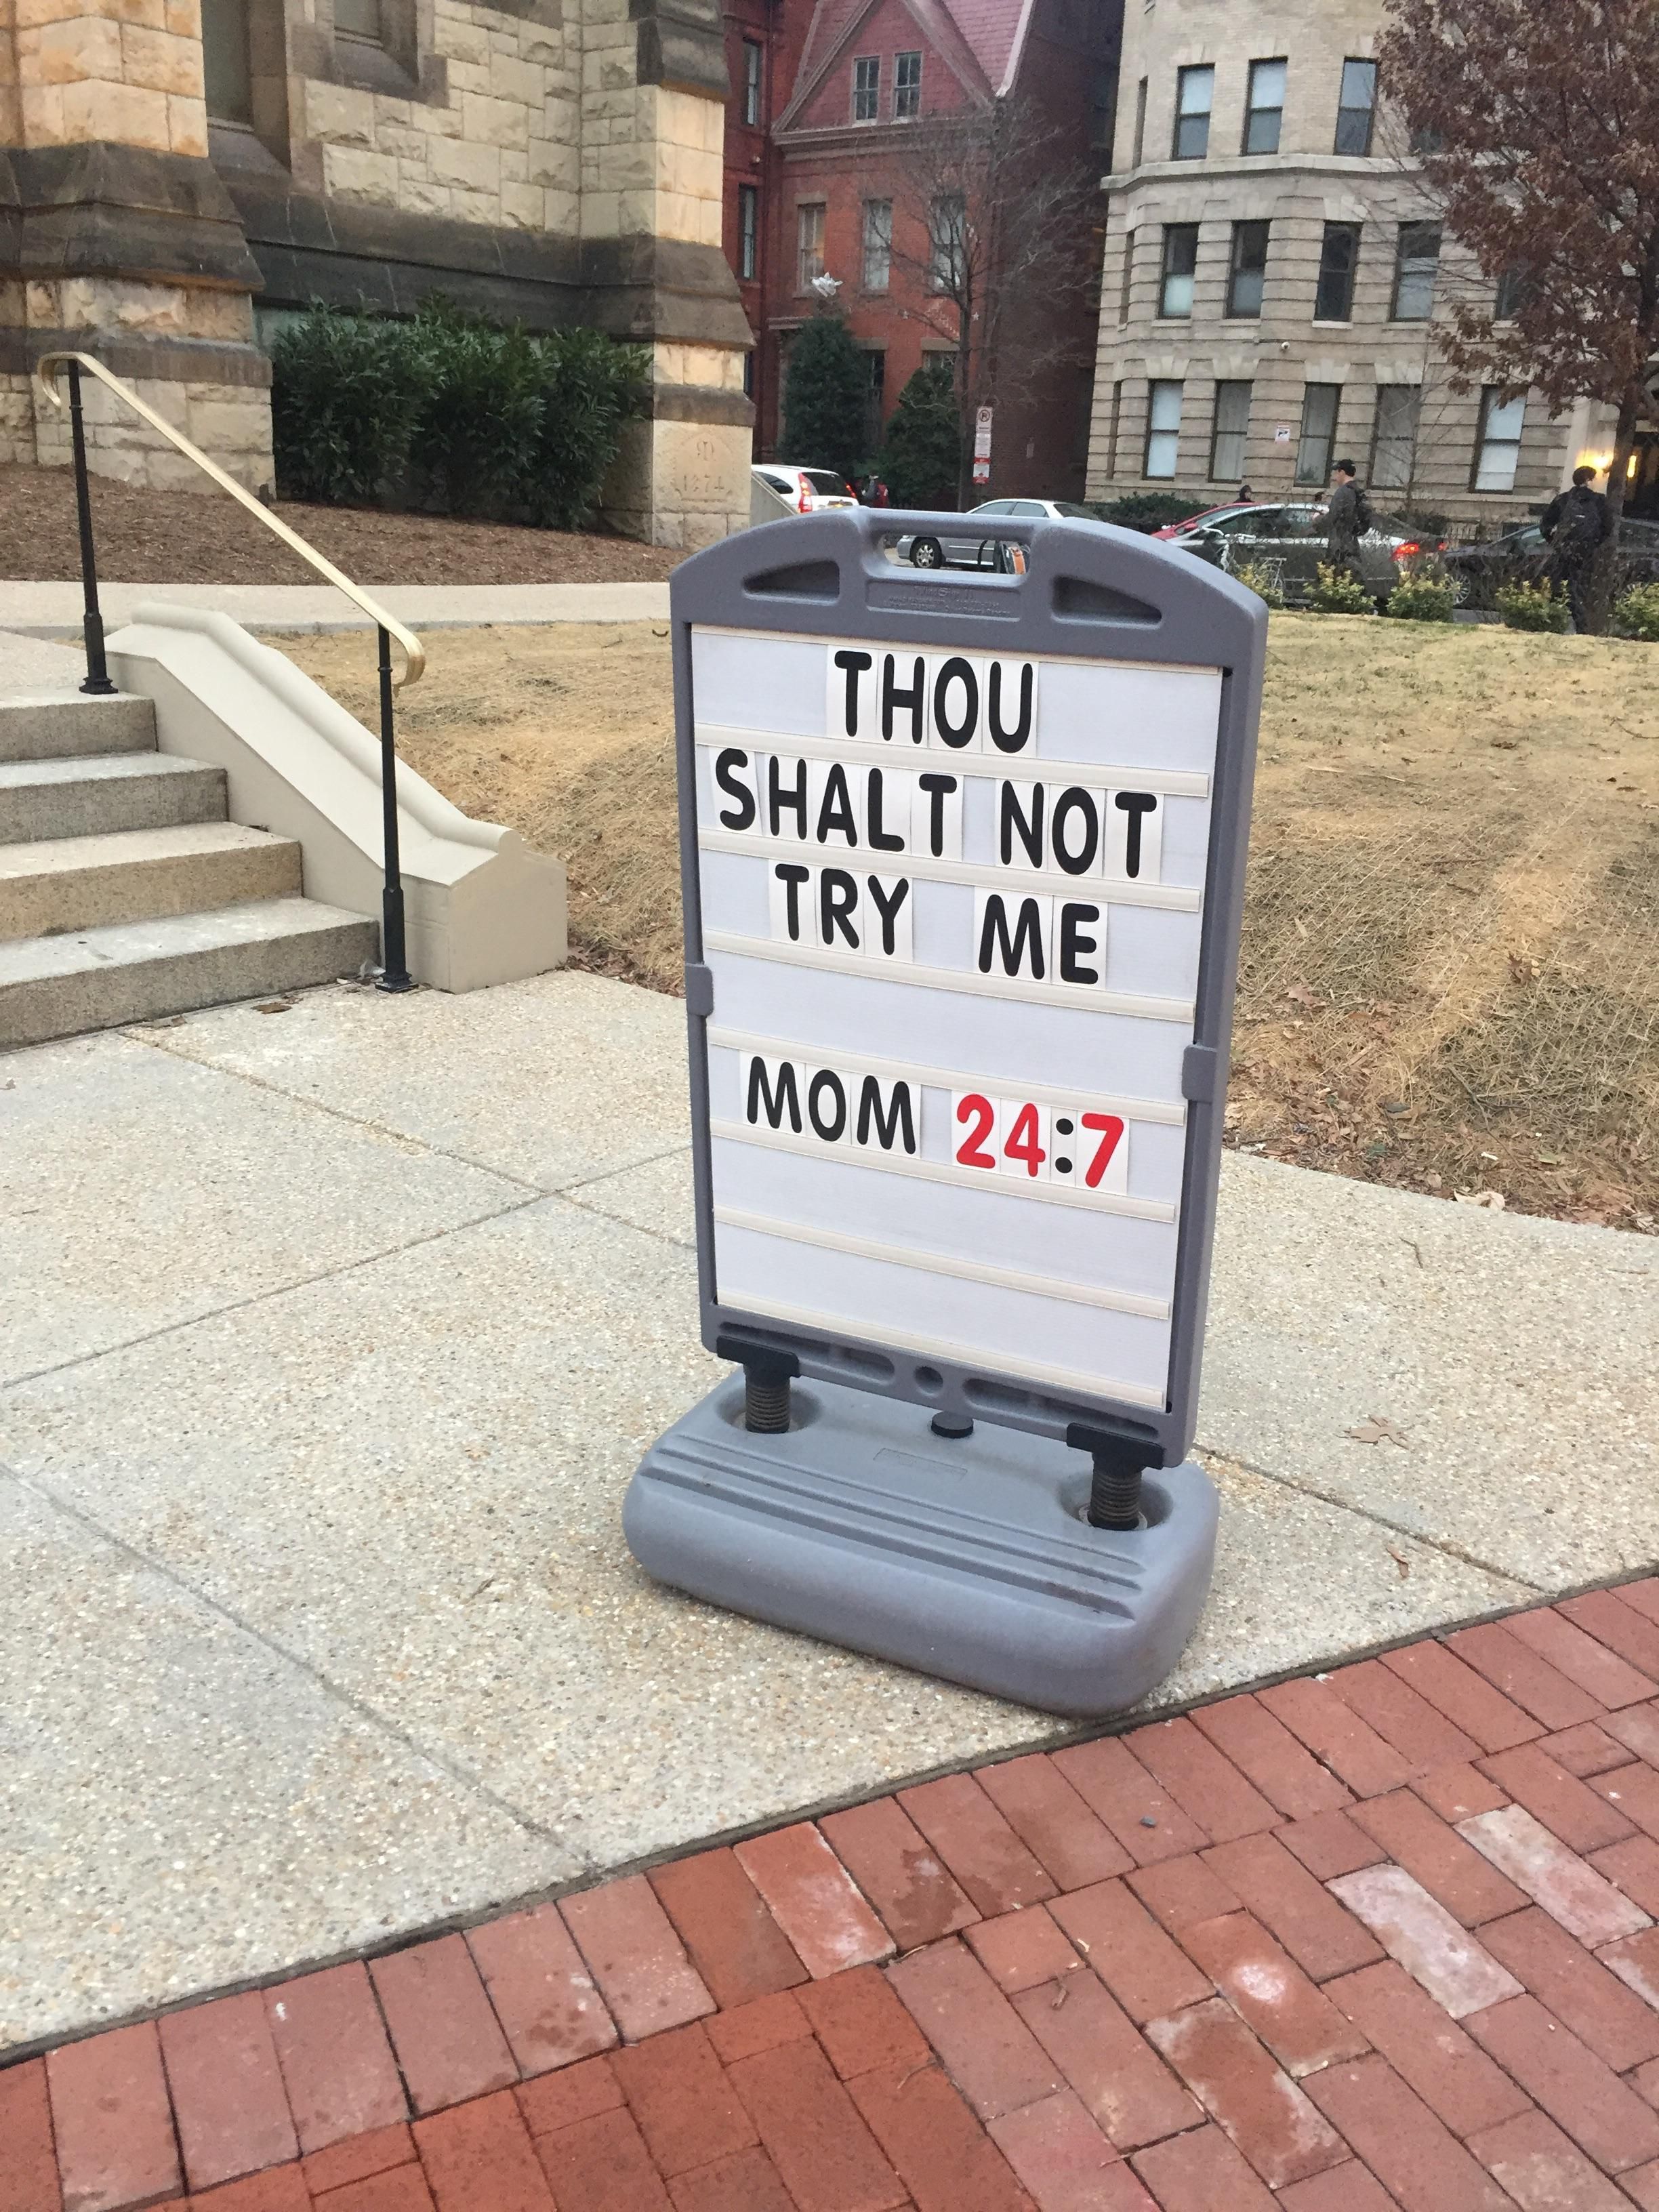 Seen outside a church on my walk to work.